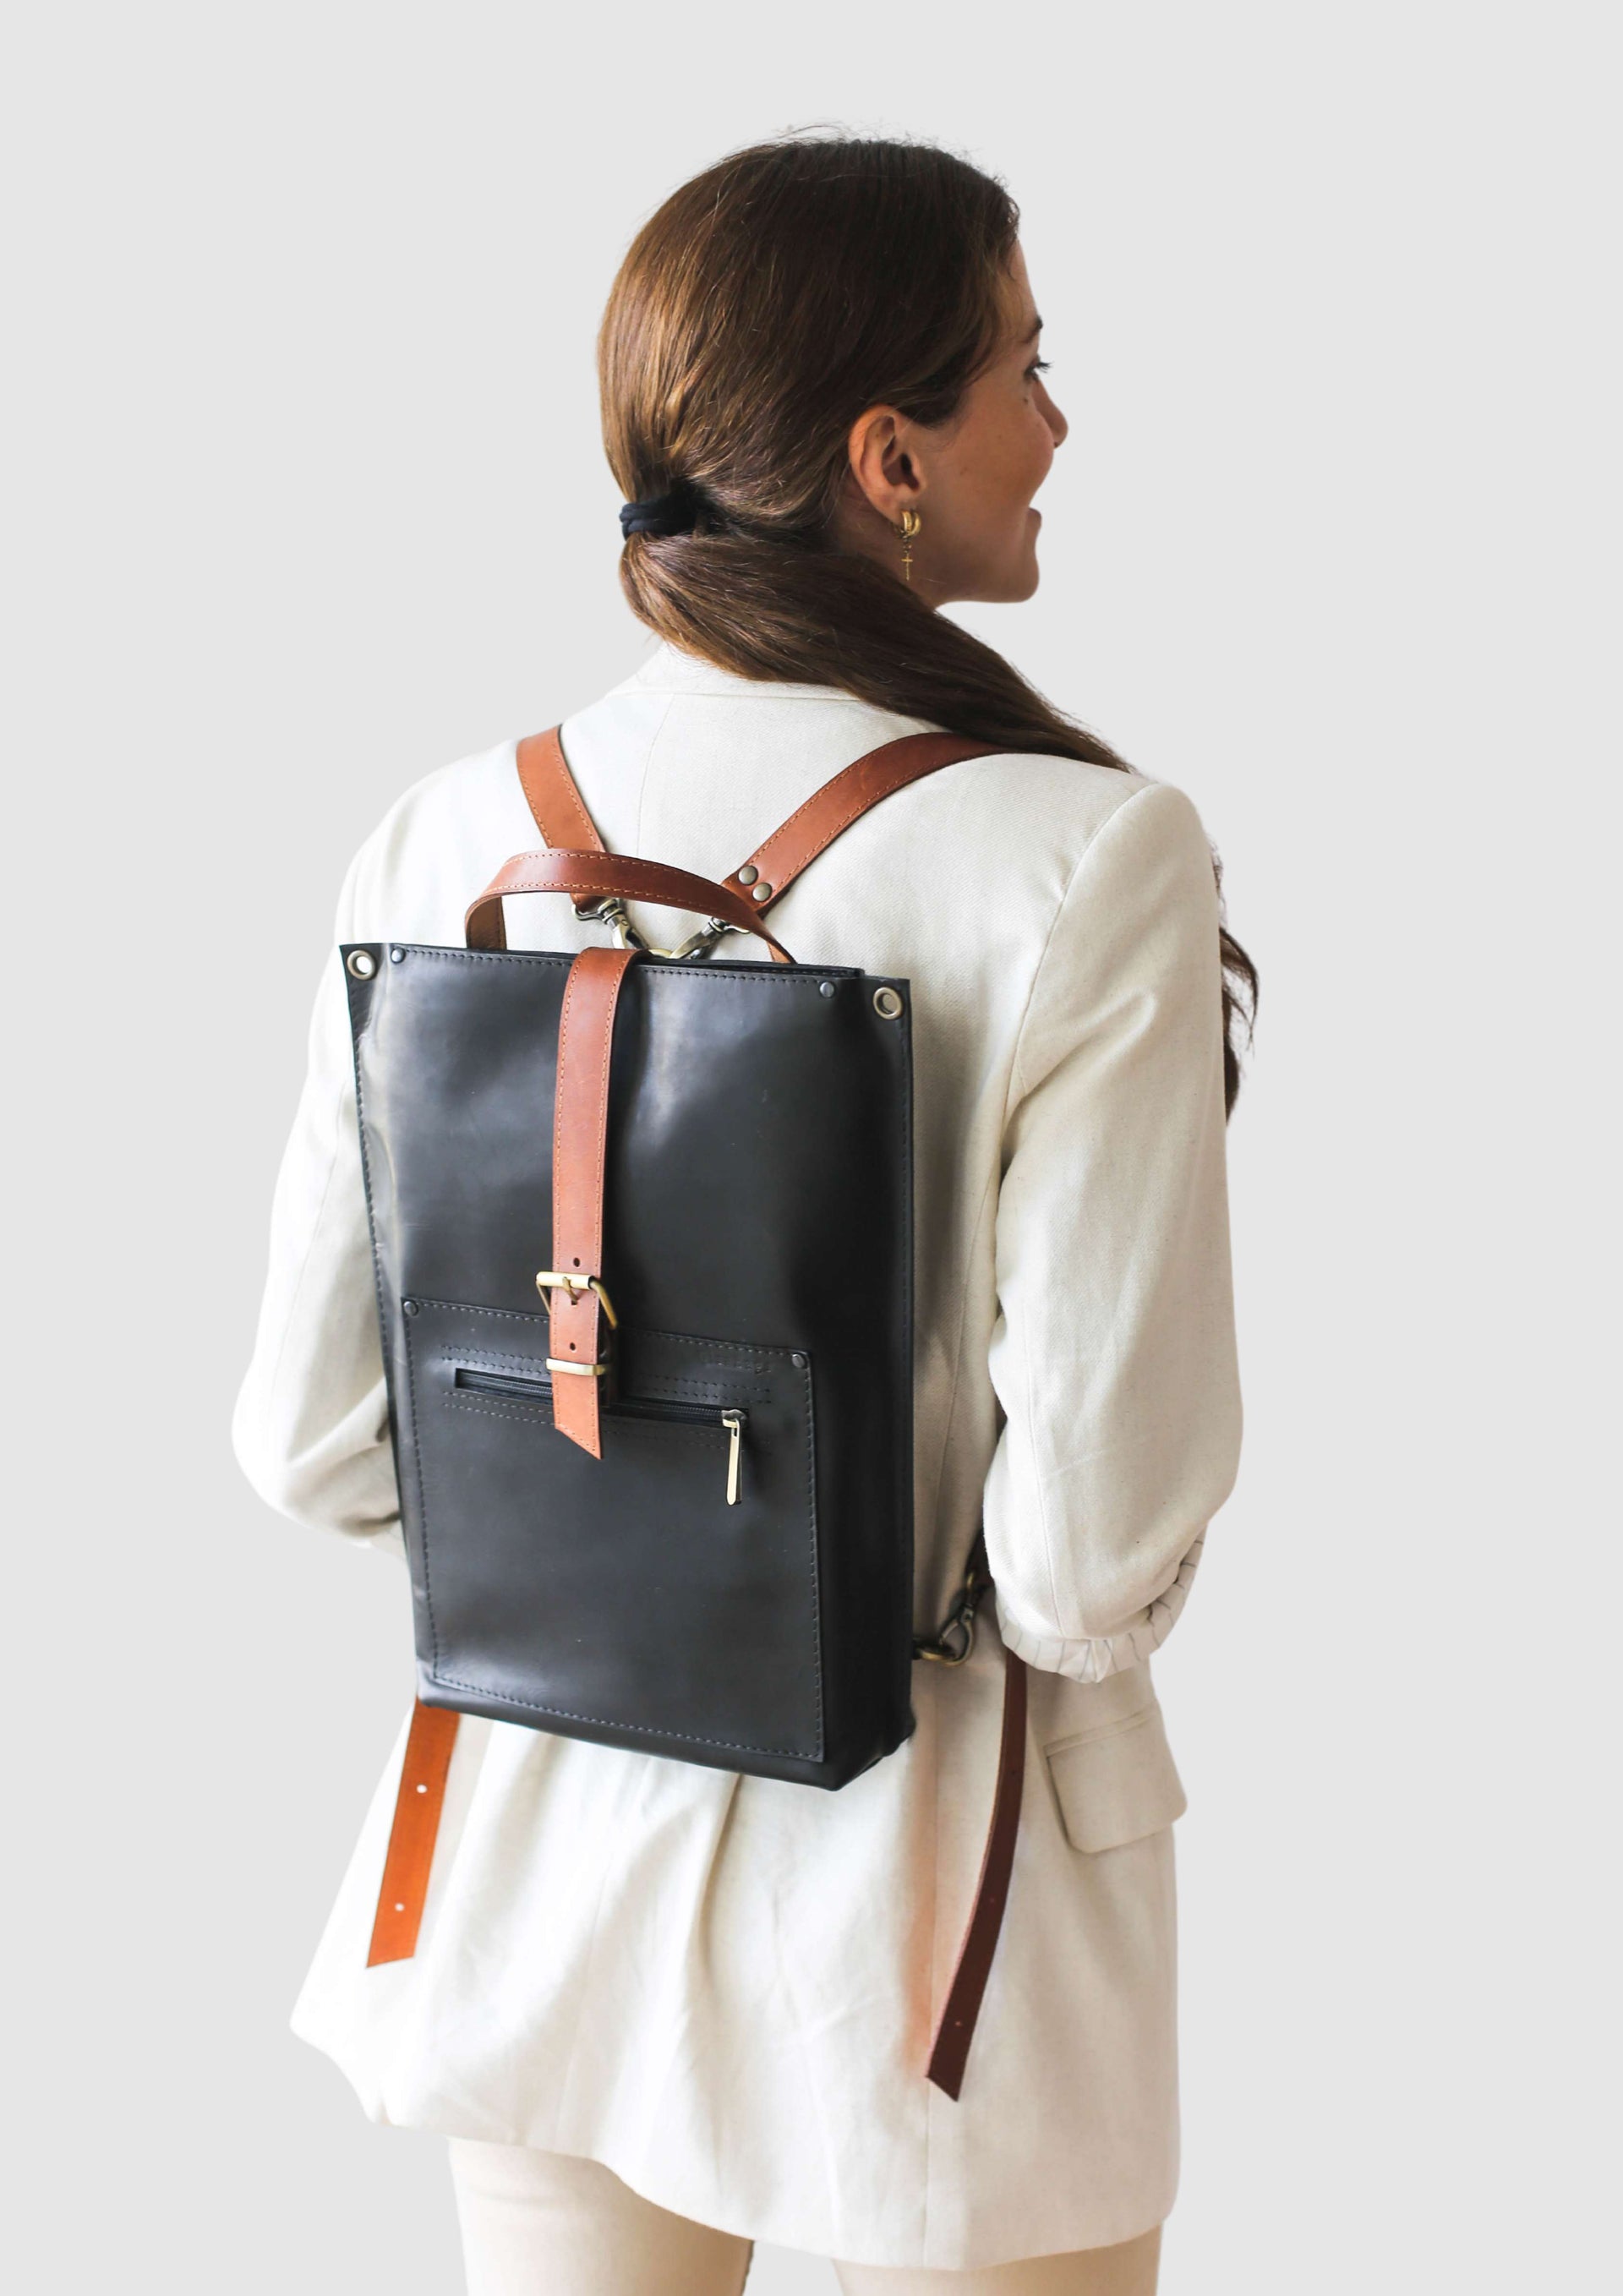 Black leather backpack with zipper